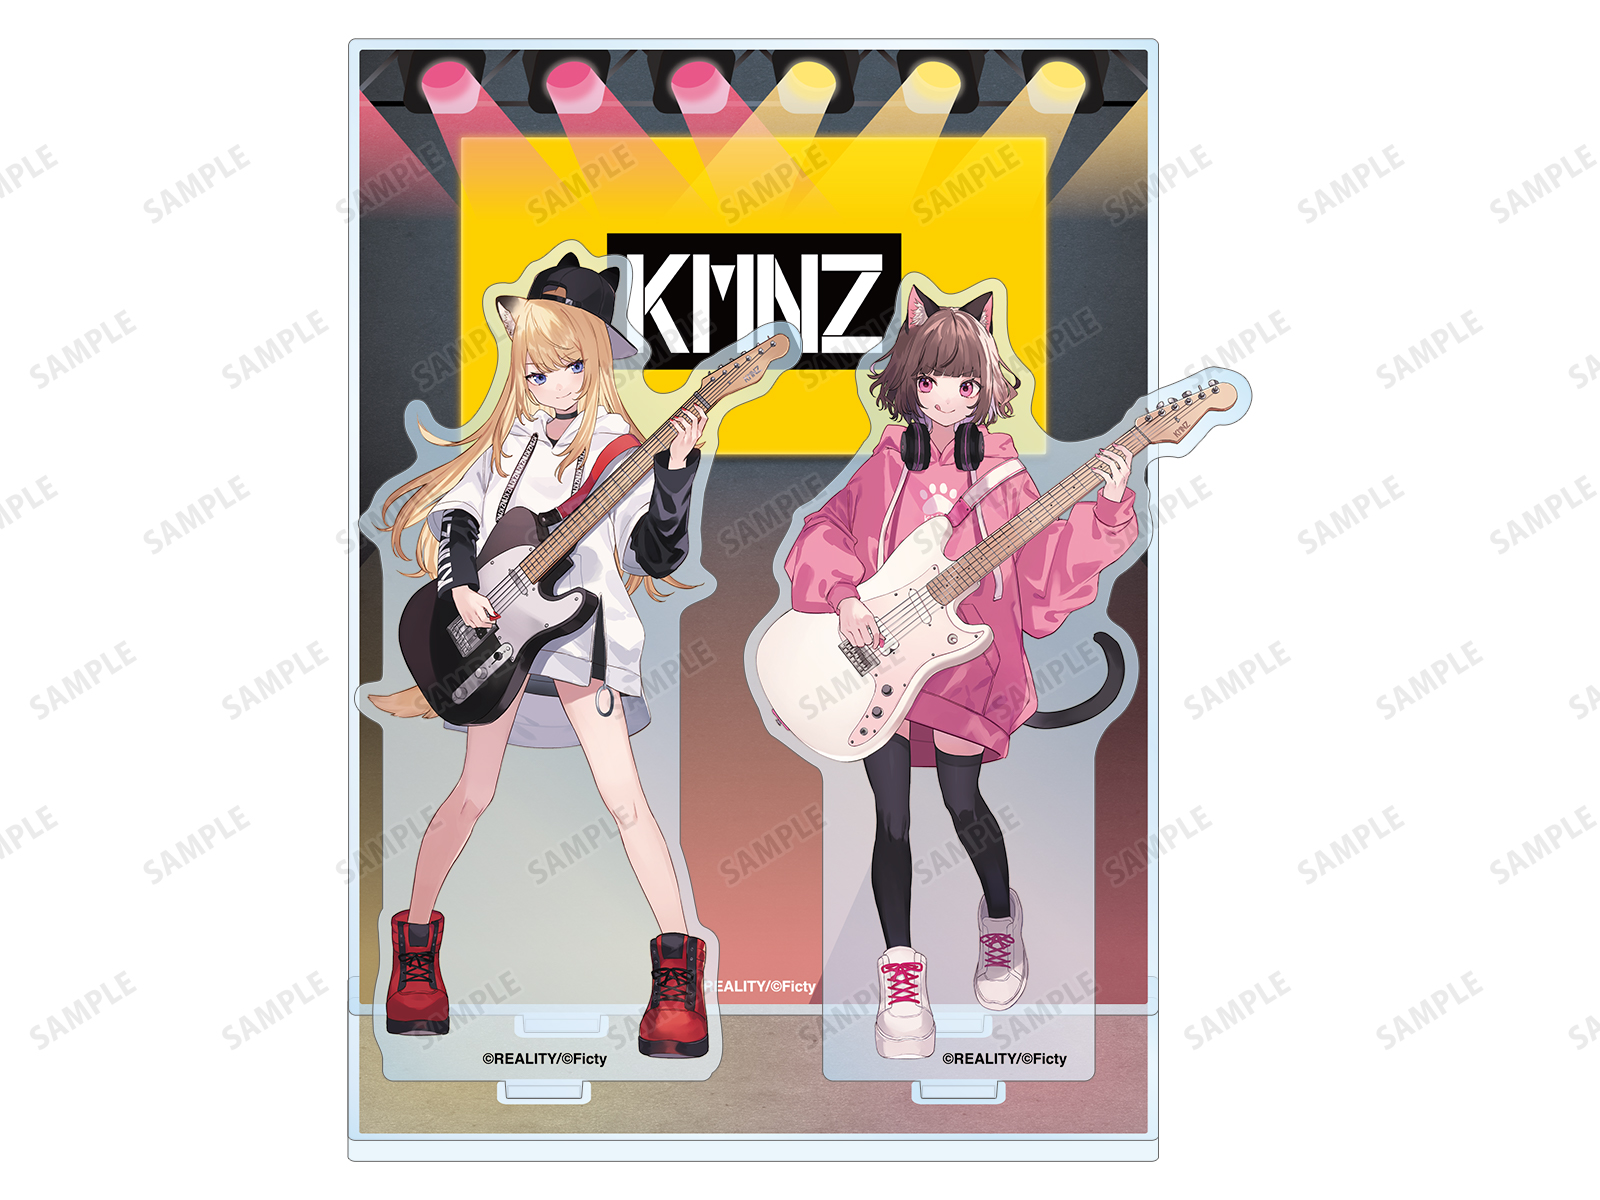 kmnz-pop-up-shop-in-tower-records3-2